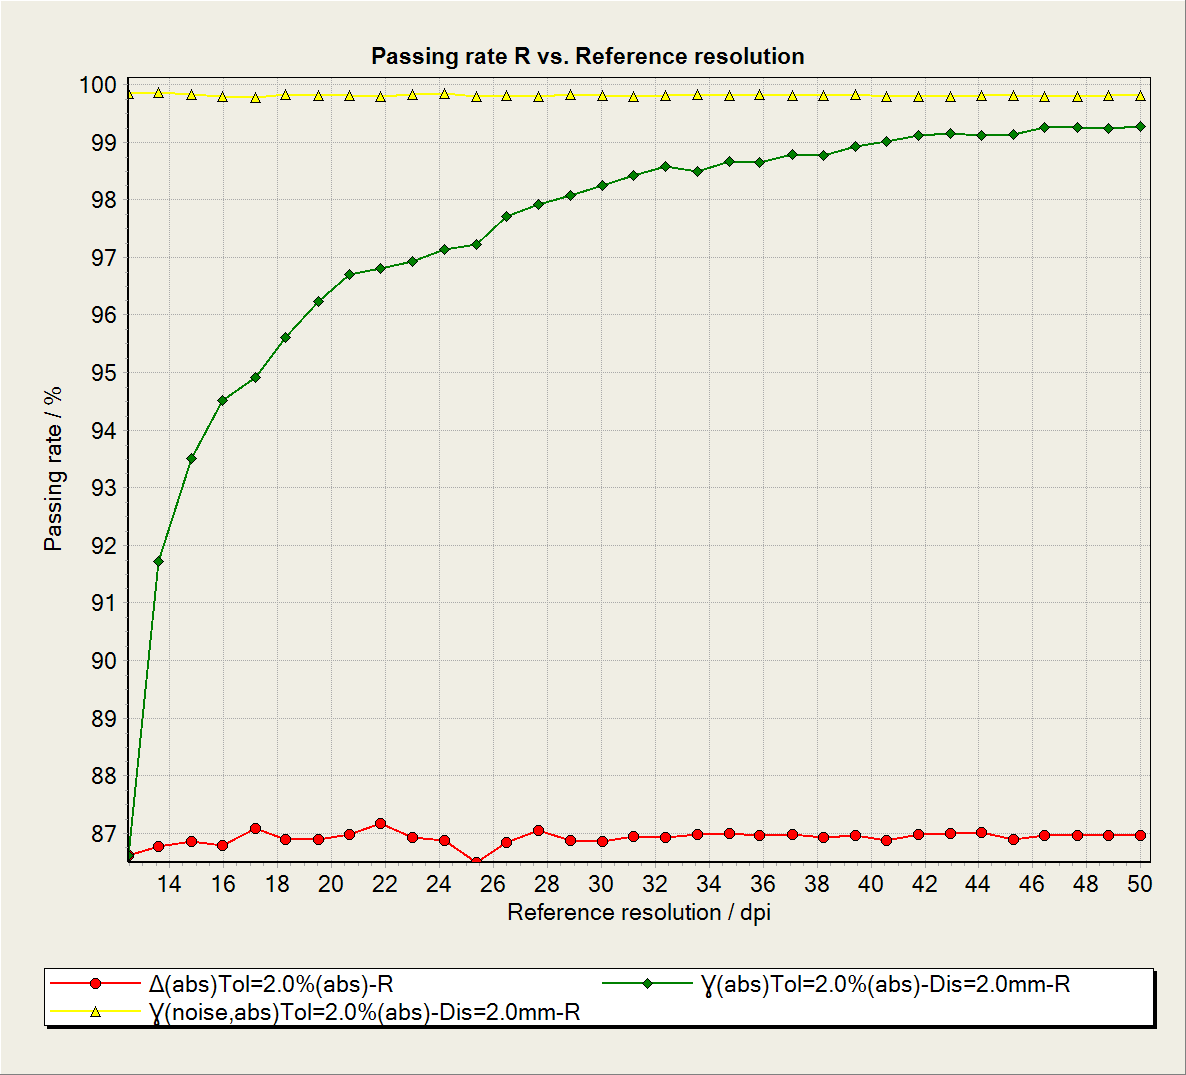 Graph showing passing rate R versus Reference resolution.